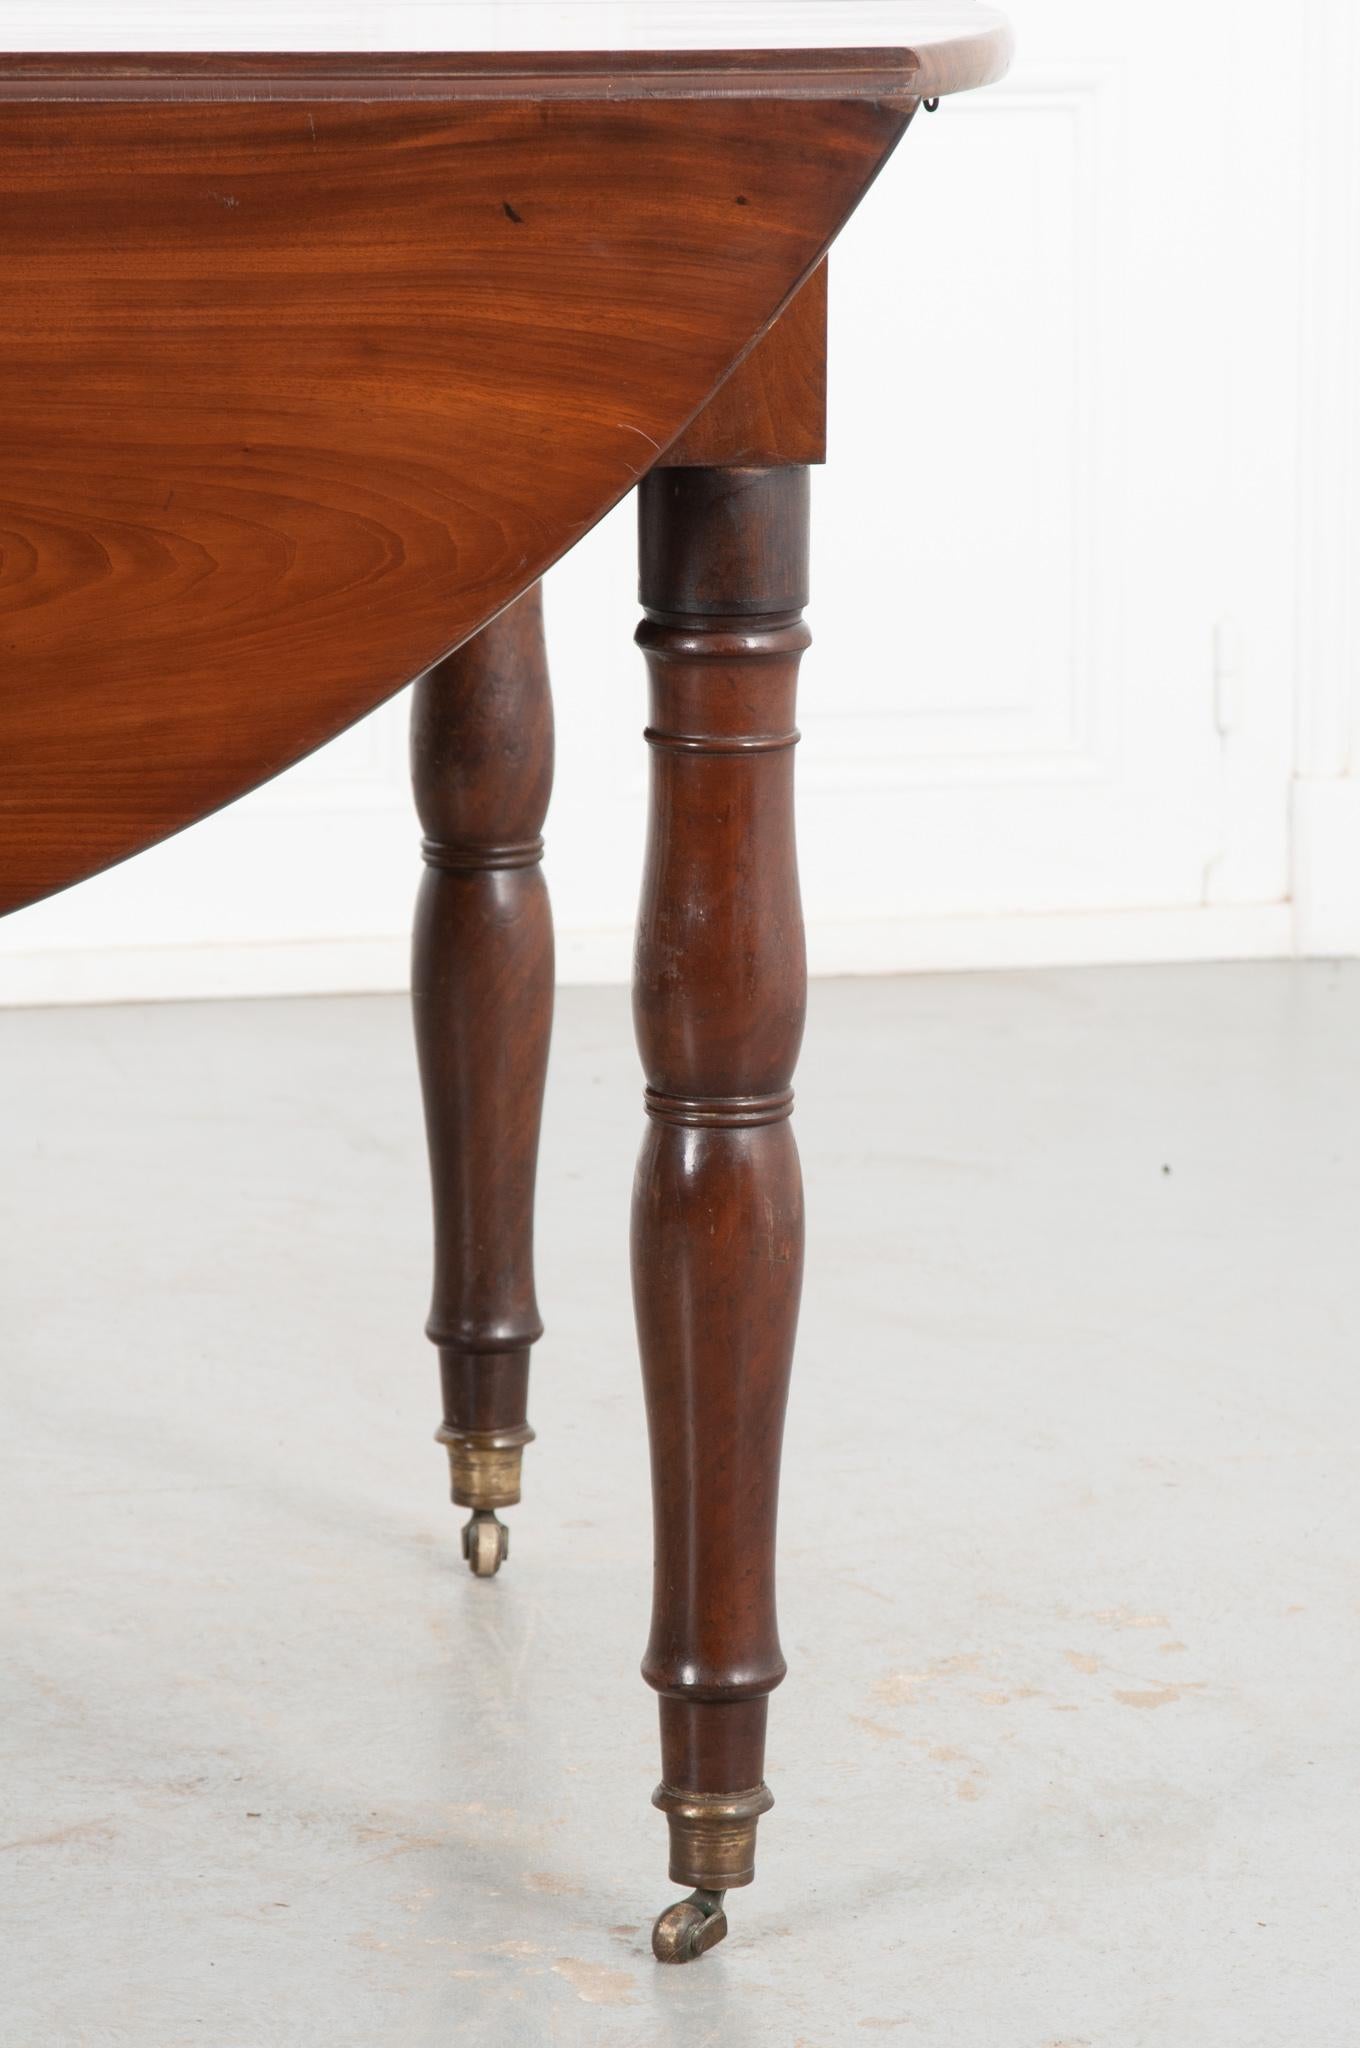 Hand-Carved French 19th Century Mahogany Drop Leaf Table